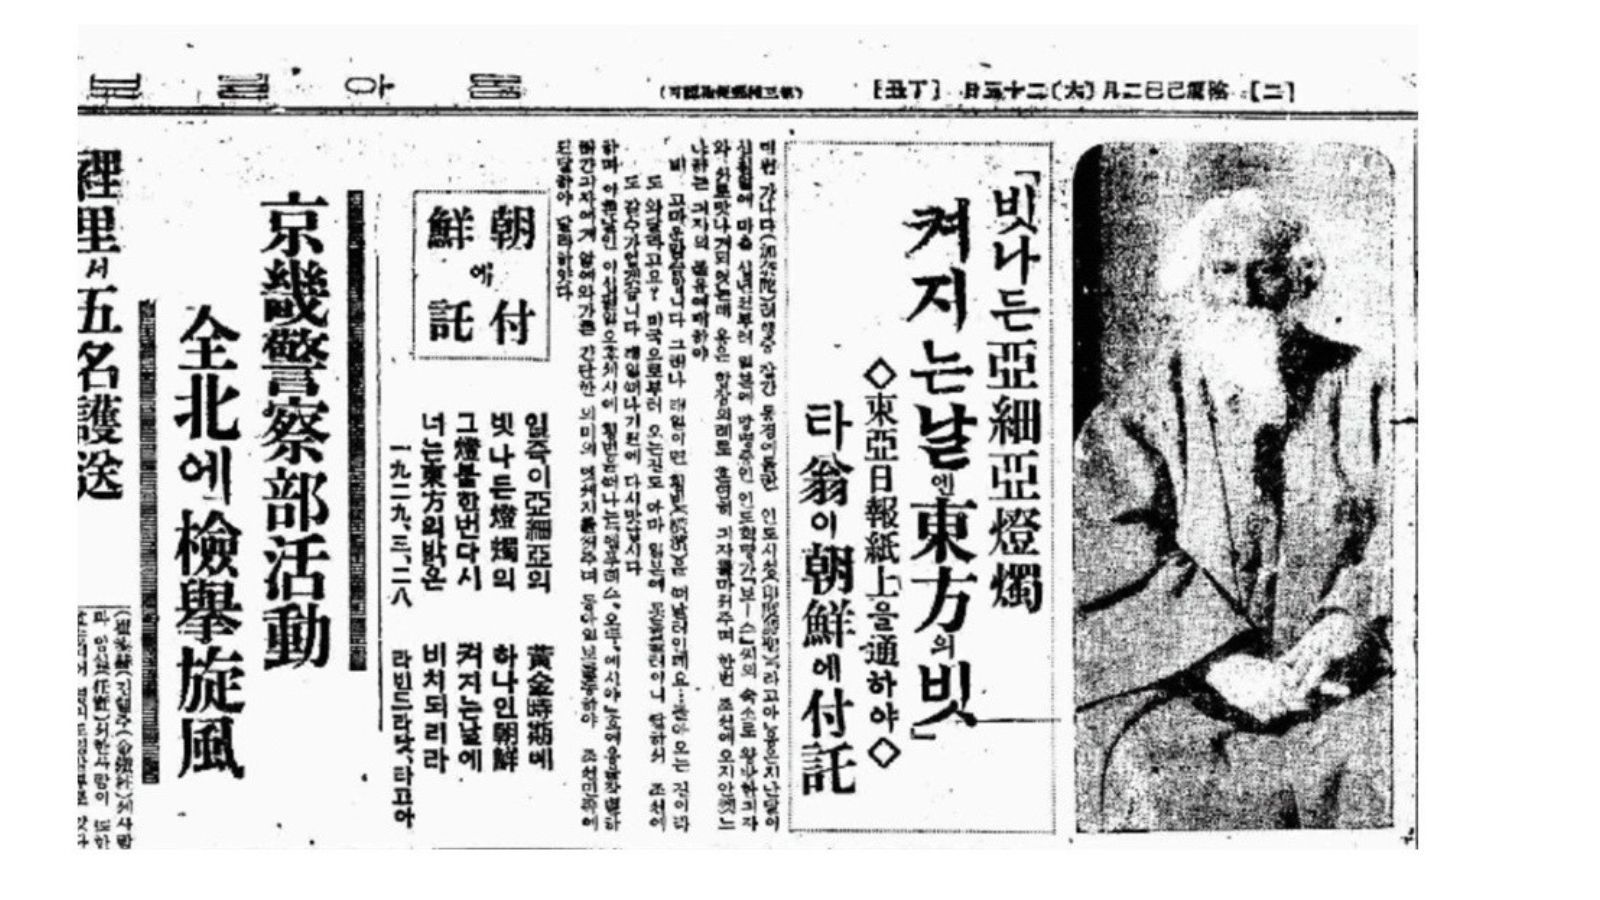 A copy of the edition of the Korean newspaper Dong-A-Ilbo published on April 2, 1929, featuring Rabindranath Tagore's poem 'Lamp of the East' translated by Chu Yu-han into Korean. (Photo credit: Santosh Kumar Ranjan)